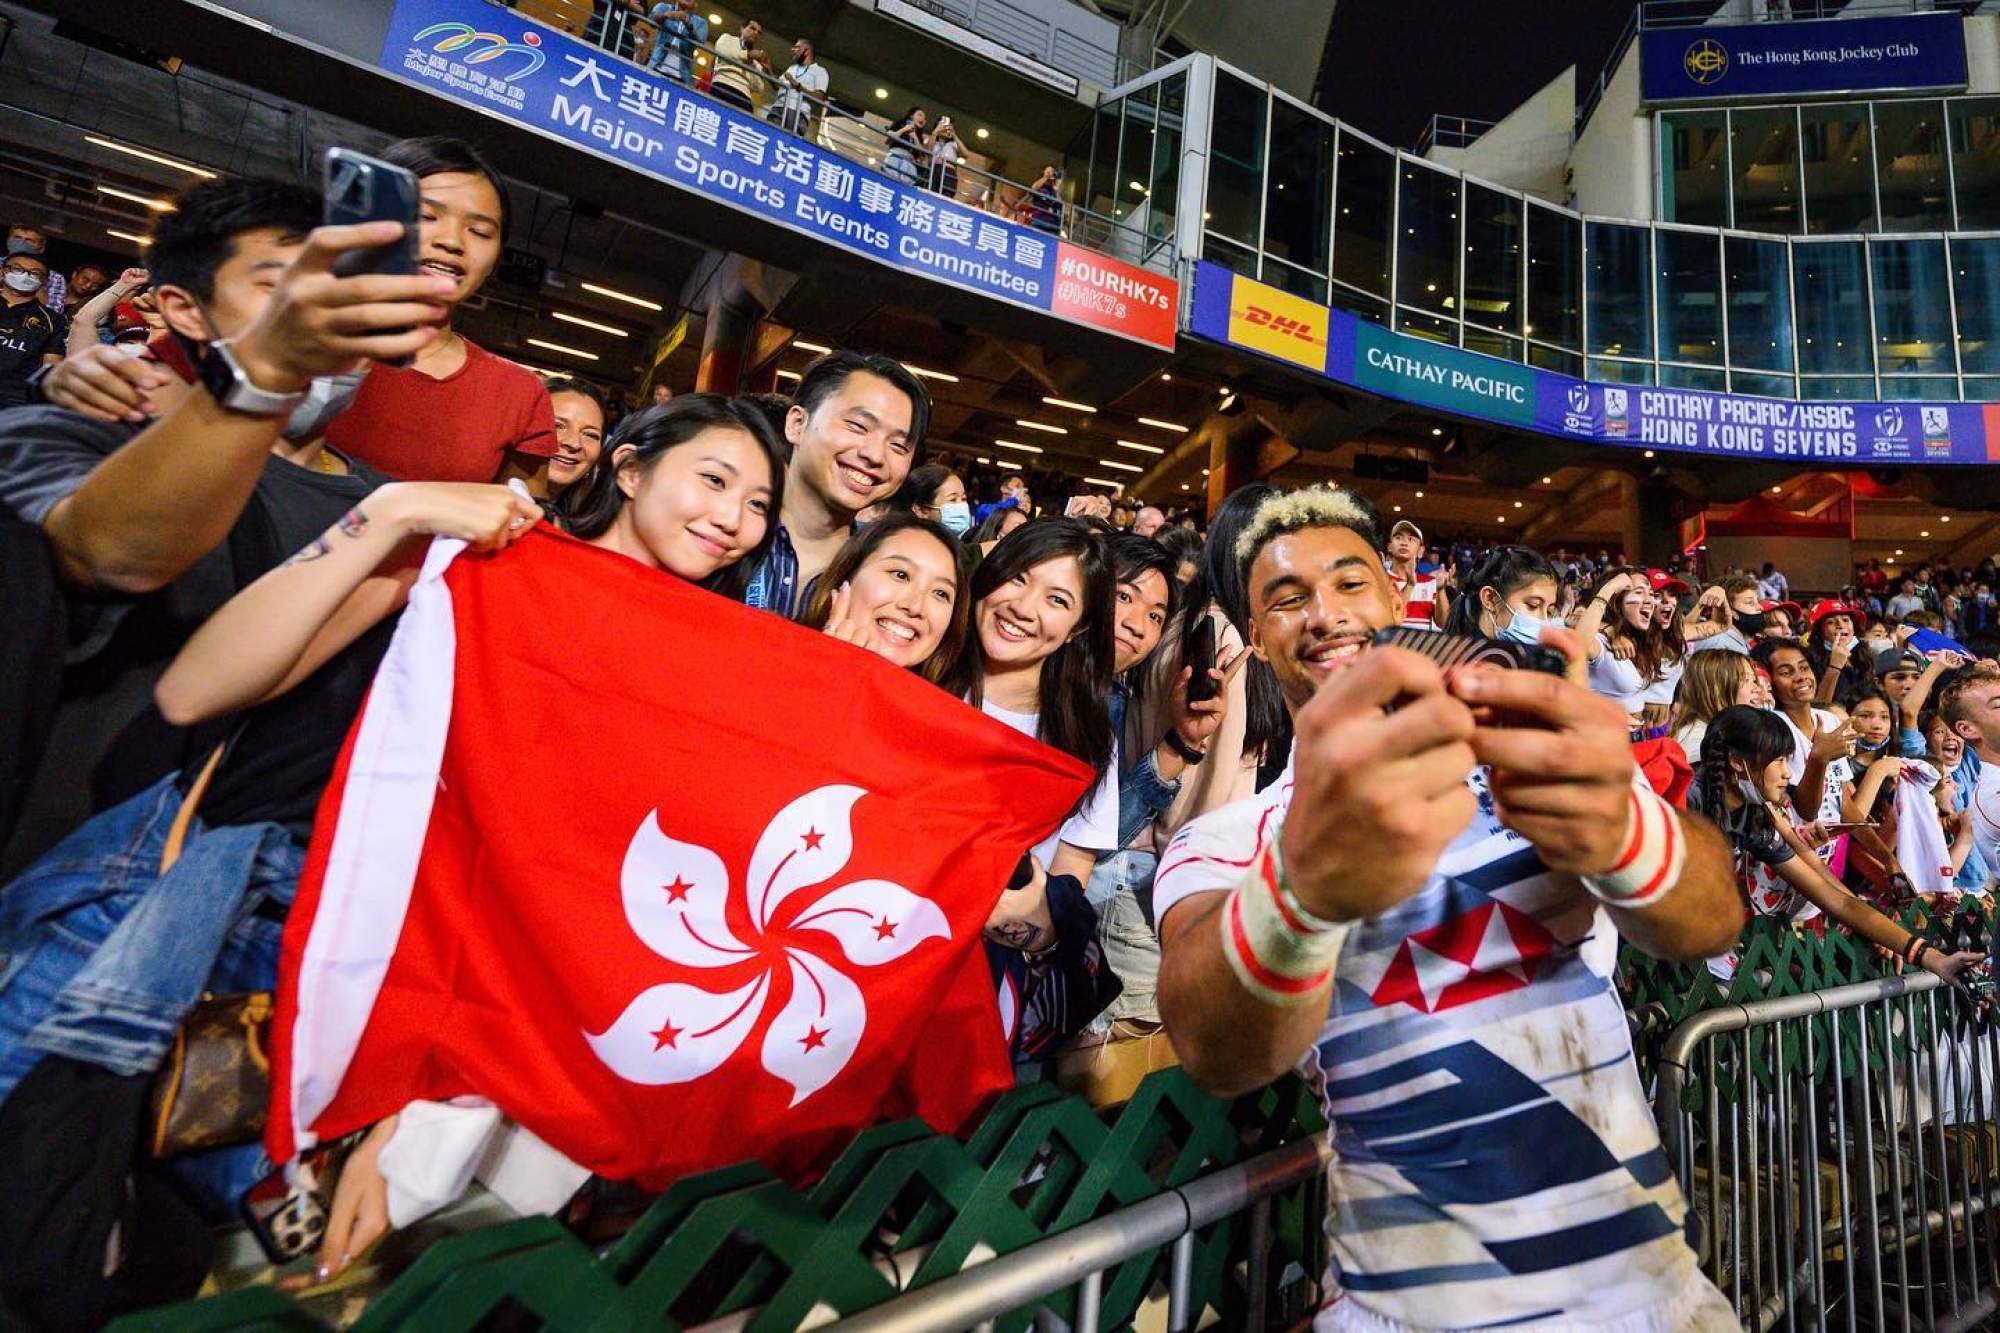 More than 20,000 rugby sevens fans watched three days of action in Hong Kong during last November’s return of the Hong Kong Sevens. Photo: Hong Kong Rugby Union